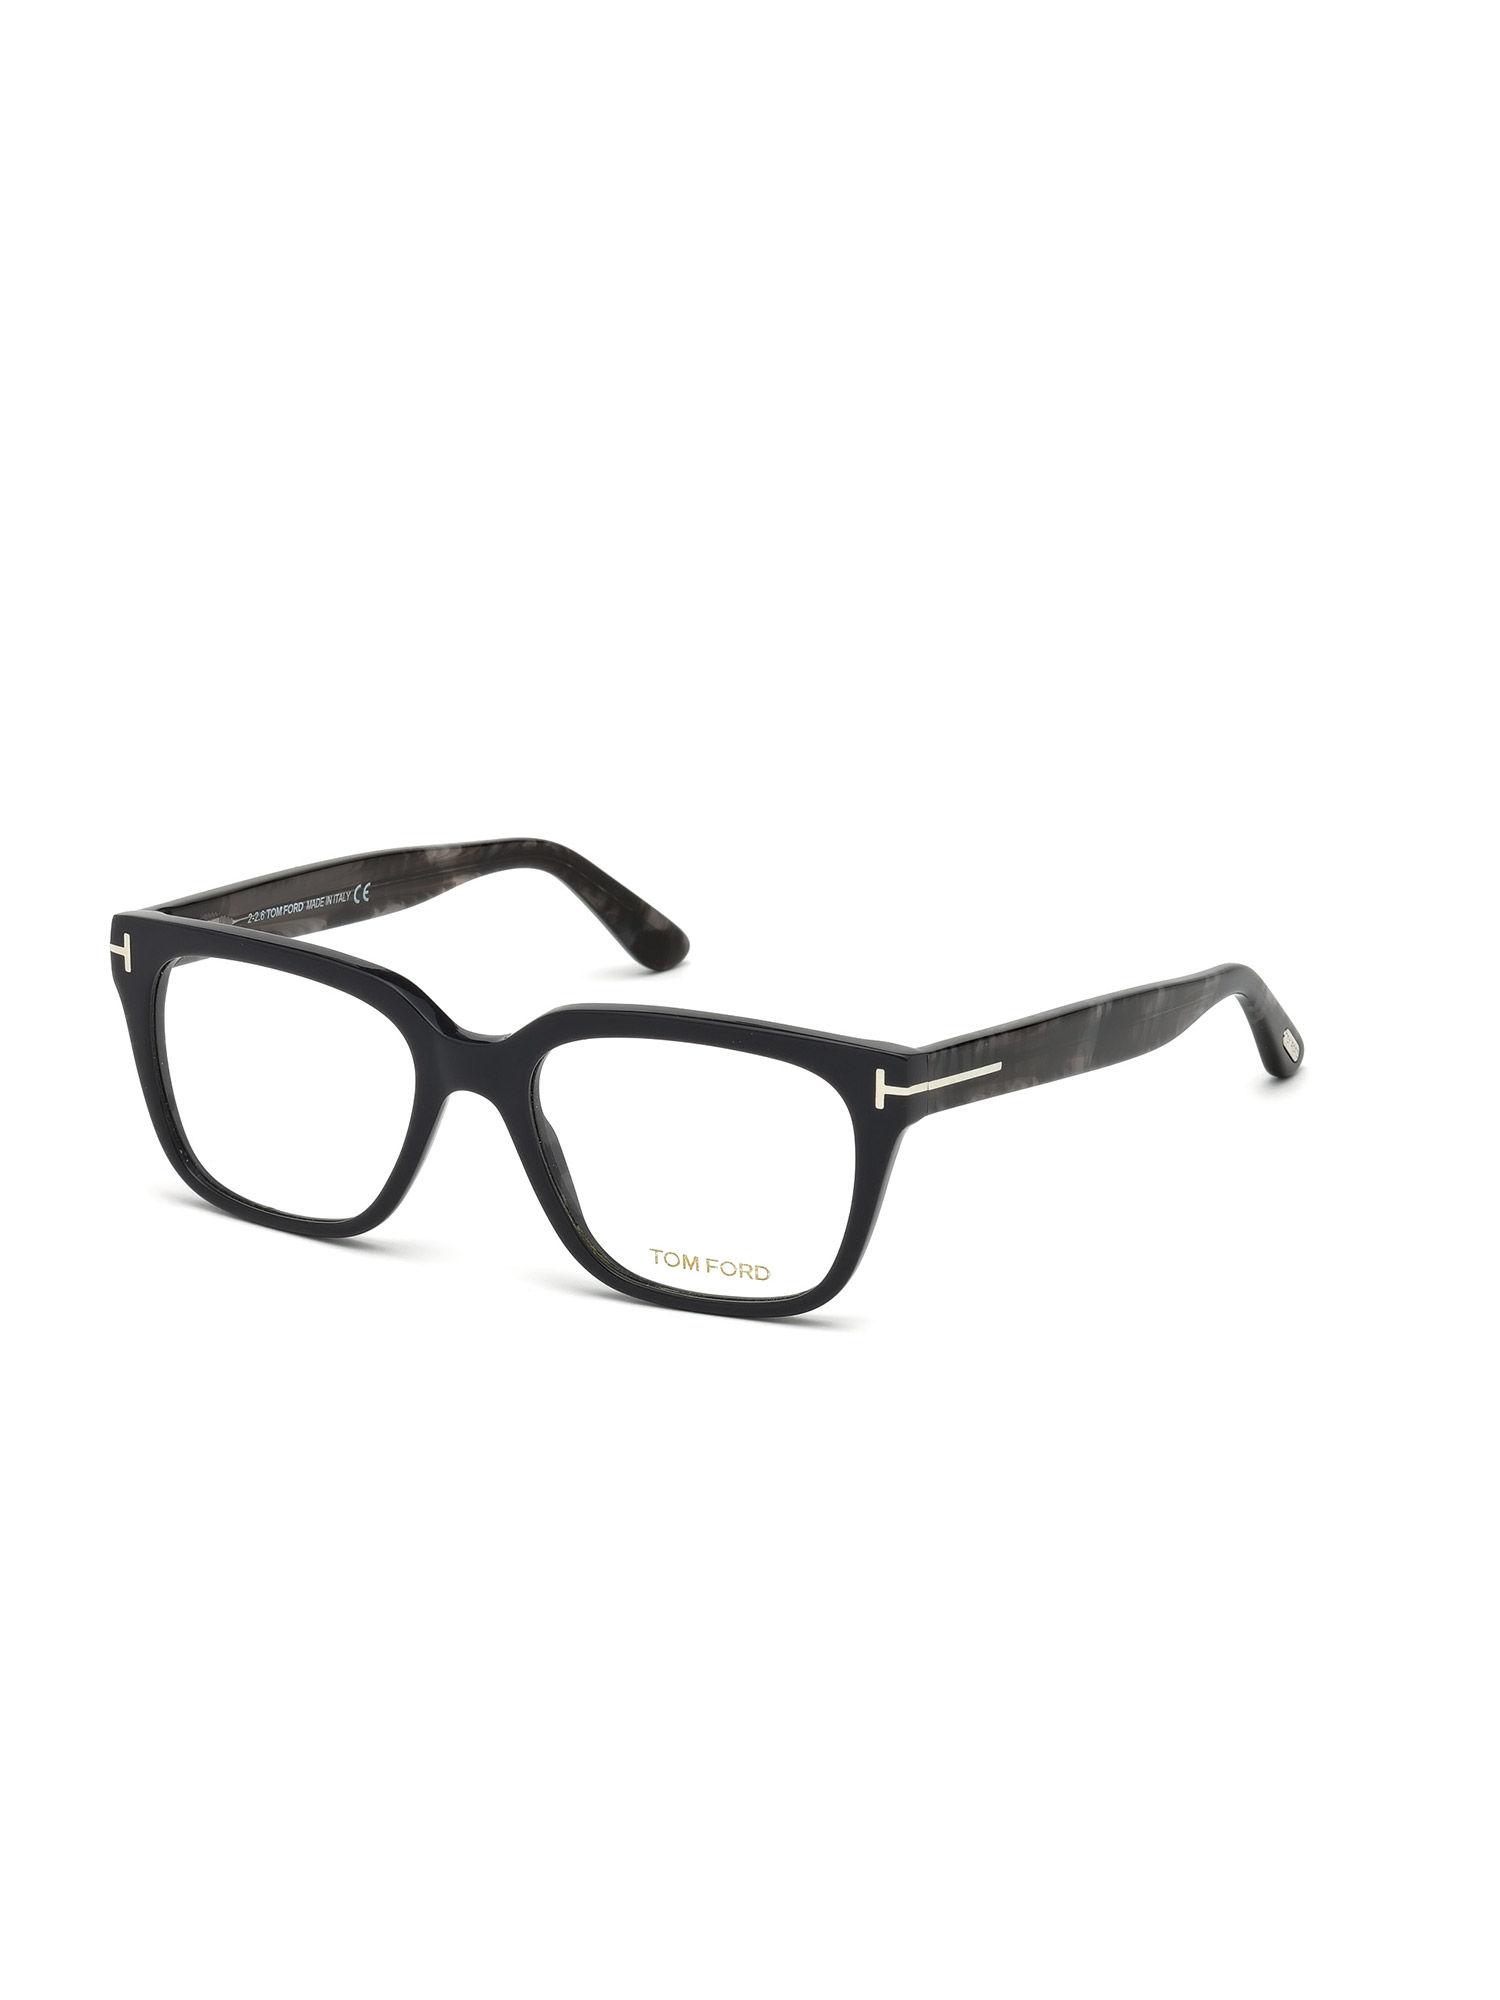 Ft5477 55 020 IS A Selection Of Iconic Square Shapes IN Premium Men Sunglasses